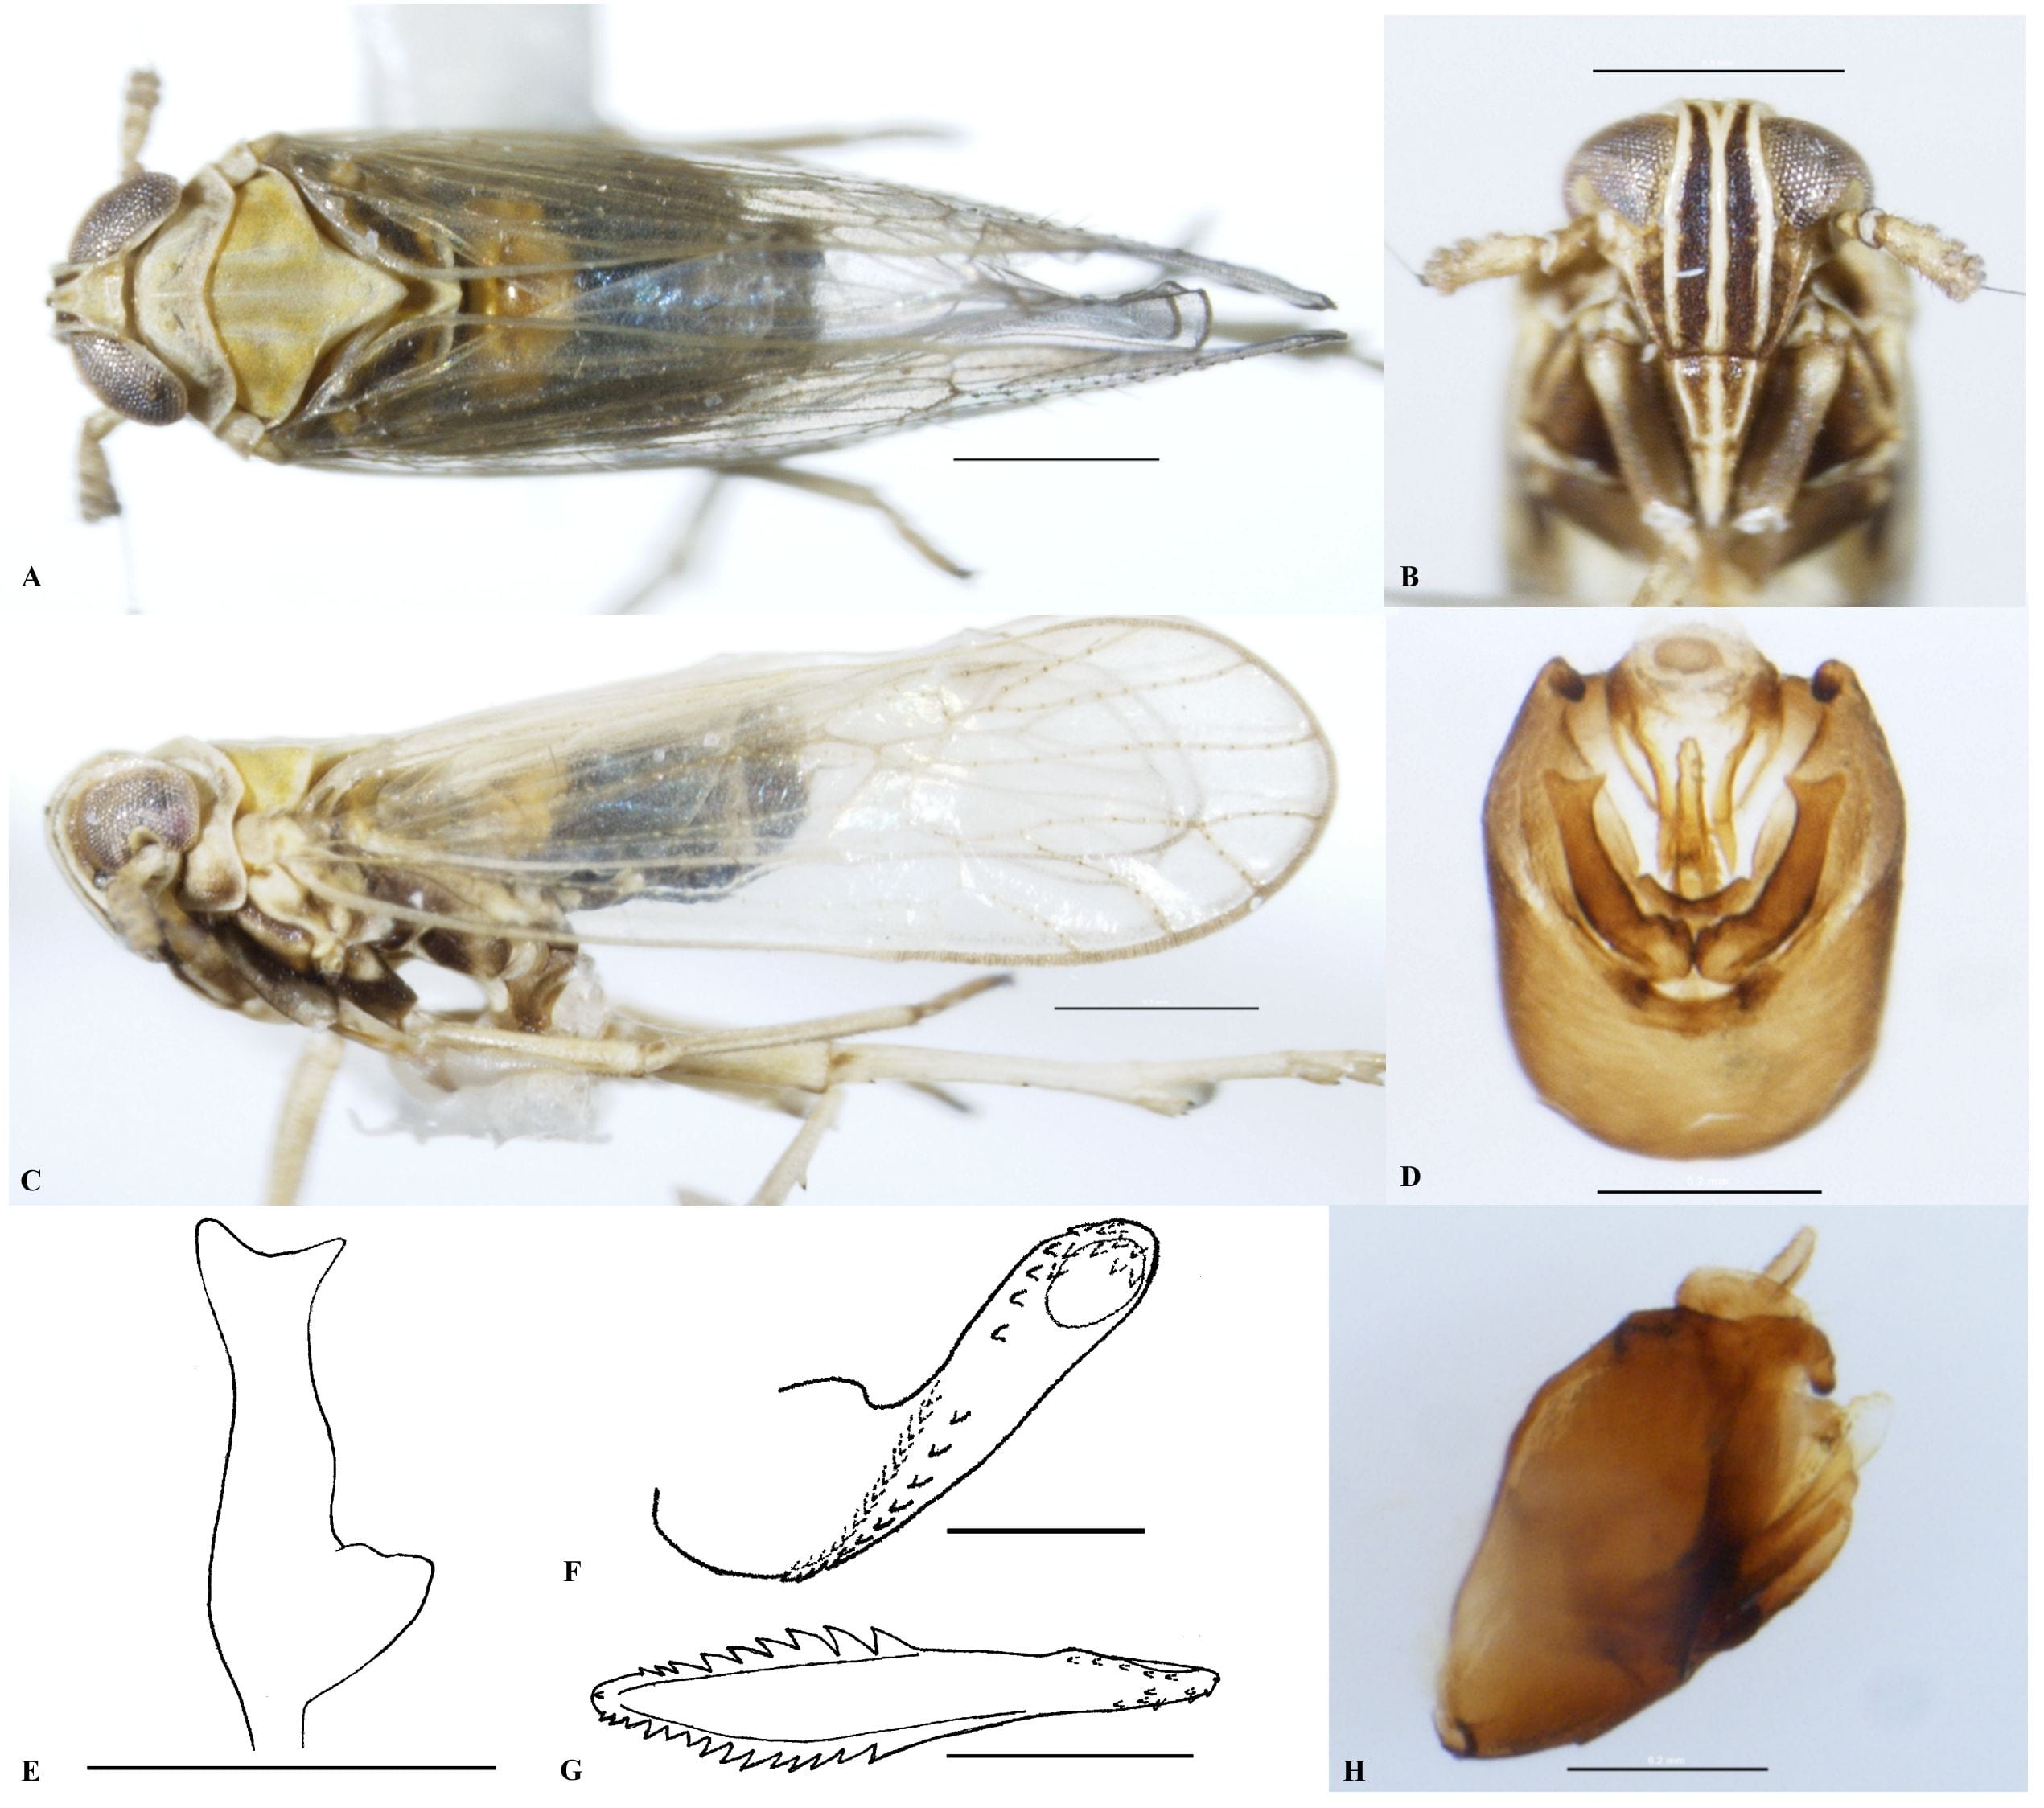 Fig. 11. Features of Toya idonea (Florida). A. Dorsal habitus (scale = 0.5 mm), B. Frons (scale = 0.2 mm), C. Lateral view (scale = 0.5 mm), D. Caudal view of pygofer (scale = 0.2 mm), E. Left paramere (scale = 0.2 mm), F. Lateral view of the aedeagus (scale = 0.1 mm), G. Ventral view of the aedeagus (scale = 0.1 mm), H. Lateral view of pygofer (scale = 0.2 mm).